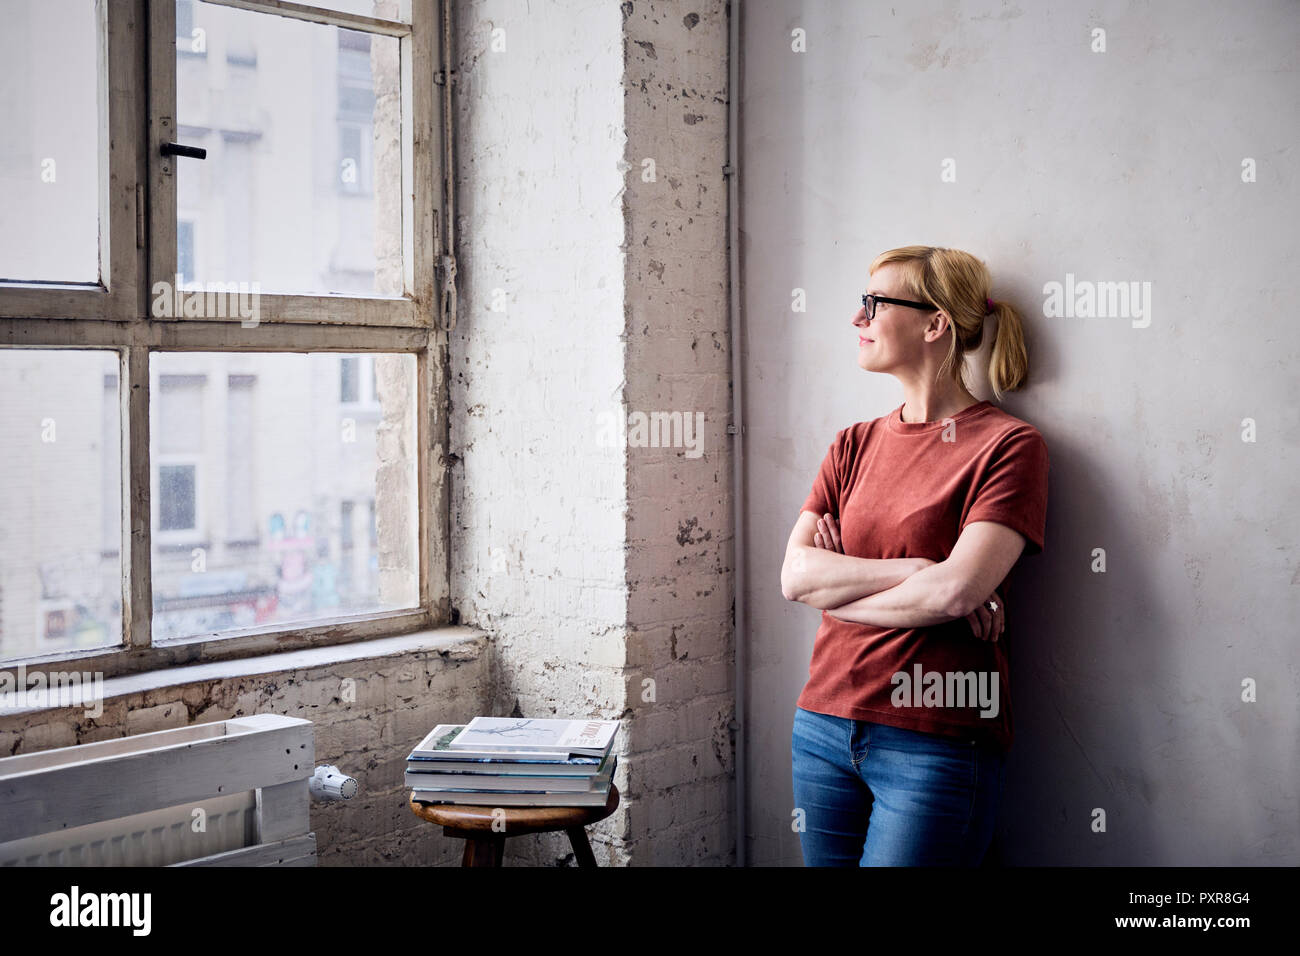 Smiling woman leaning against wall in loft looking through window Stock Photo